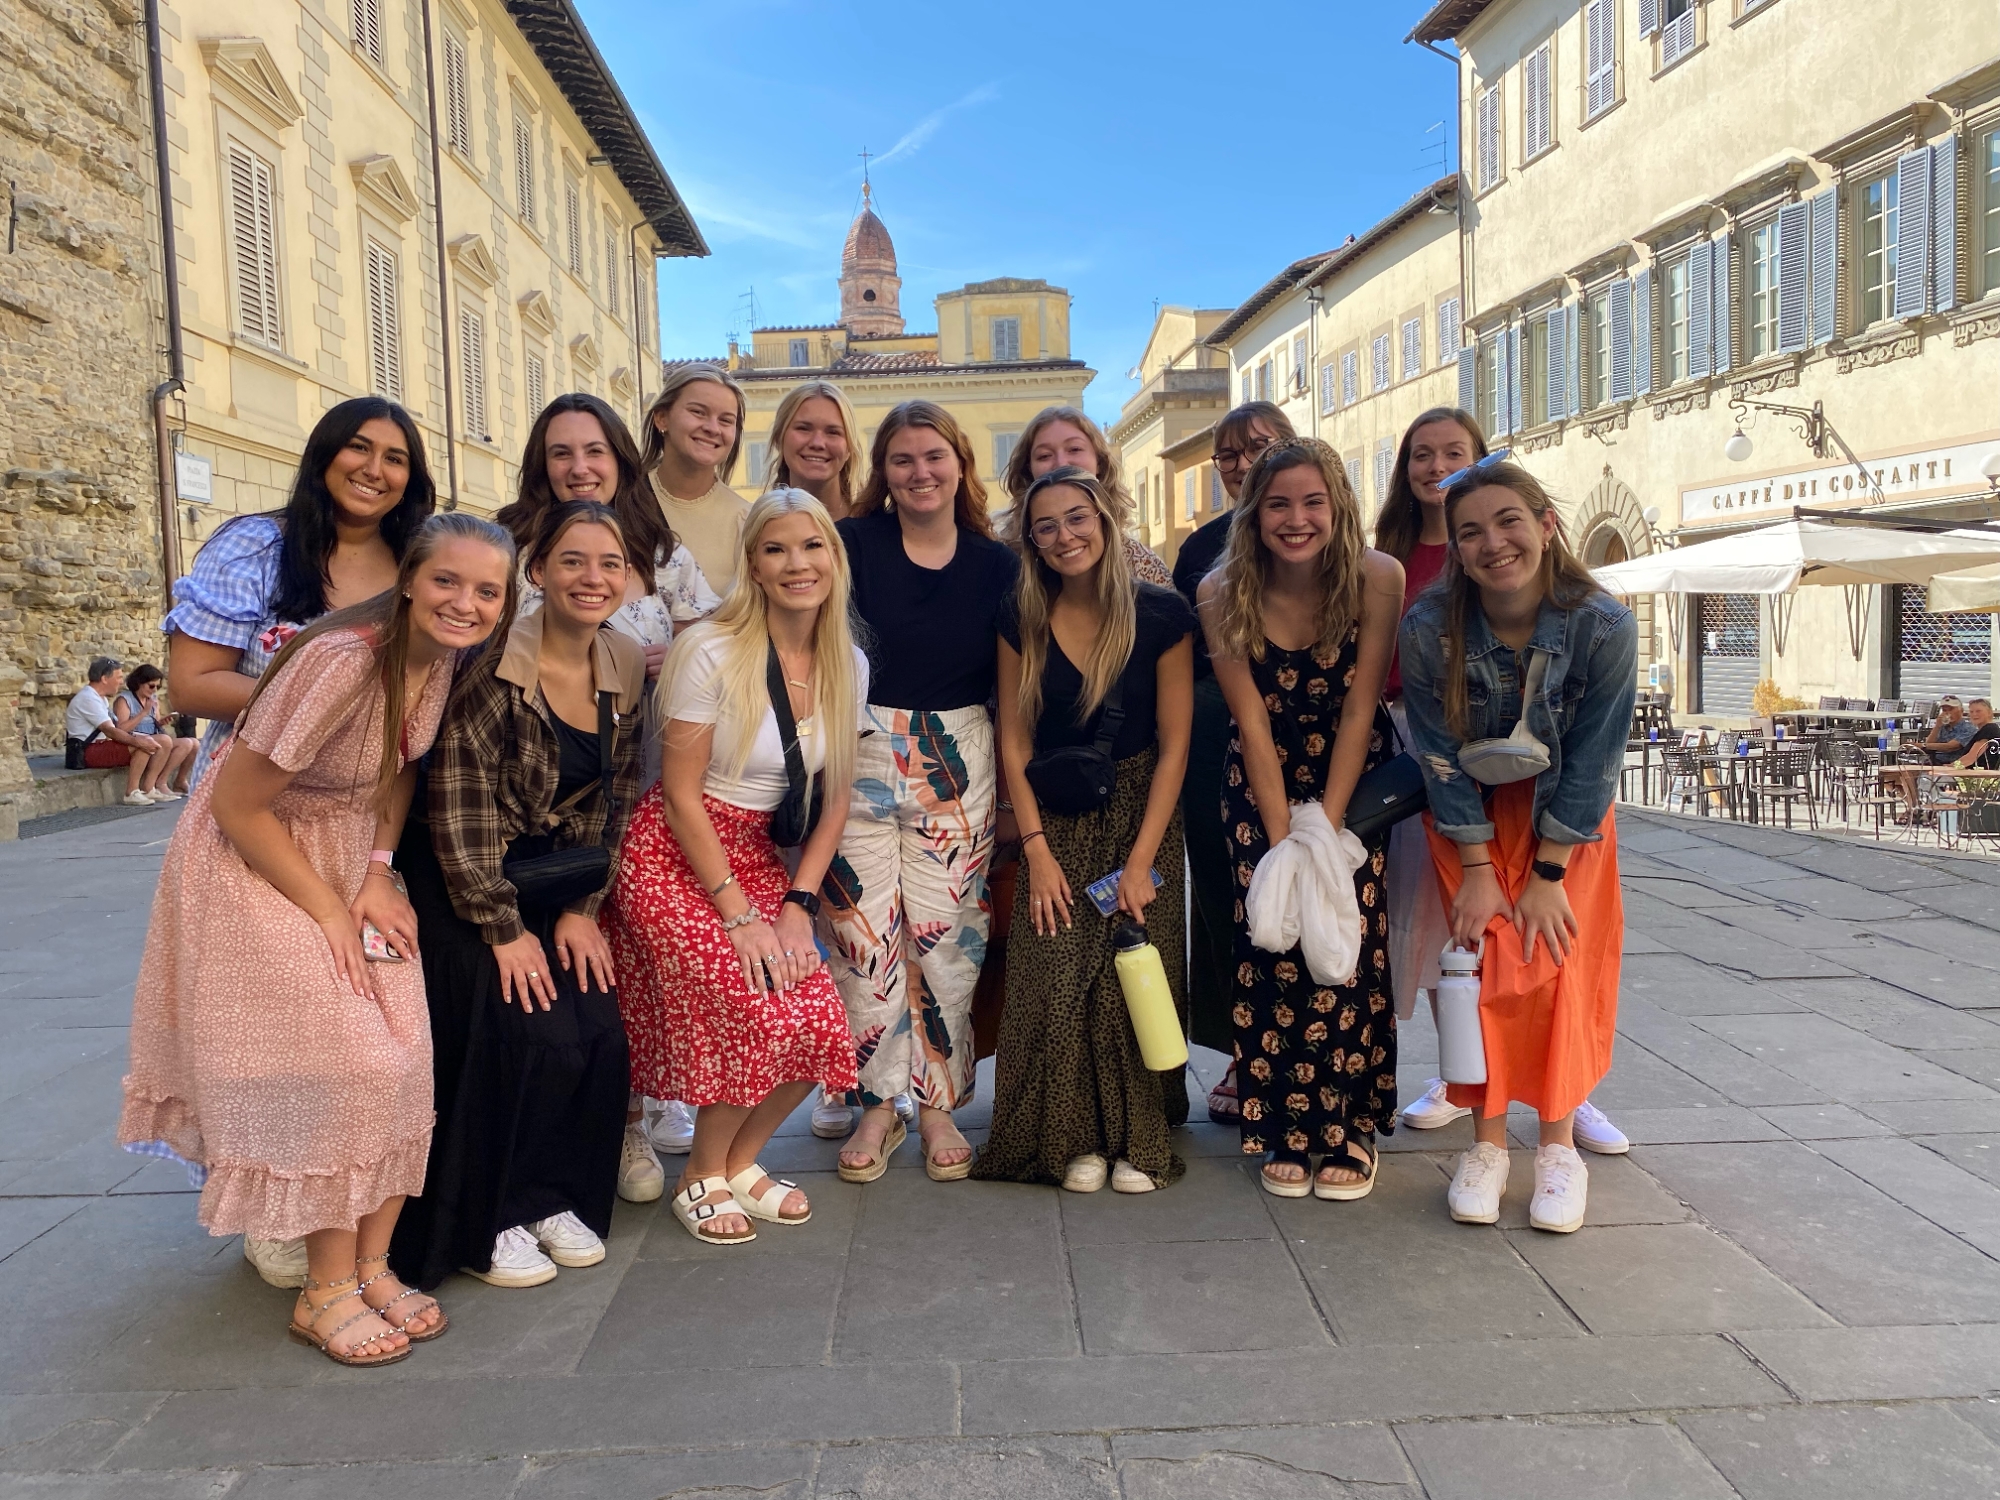 Students together in a group on an Italian piazza